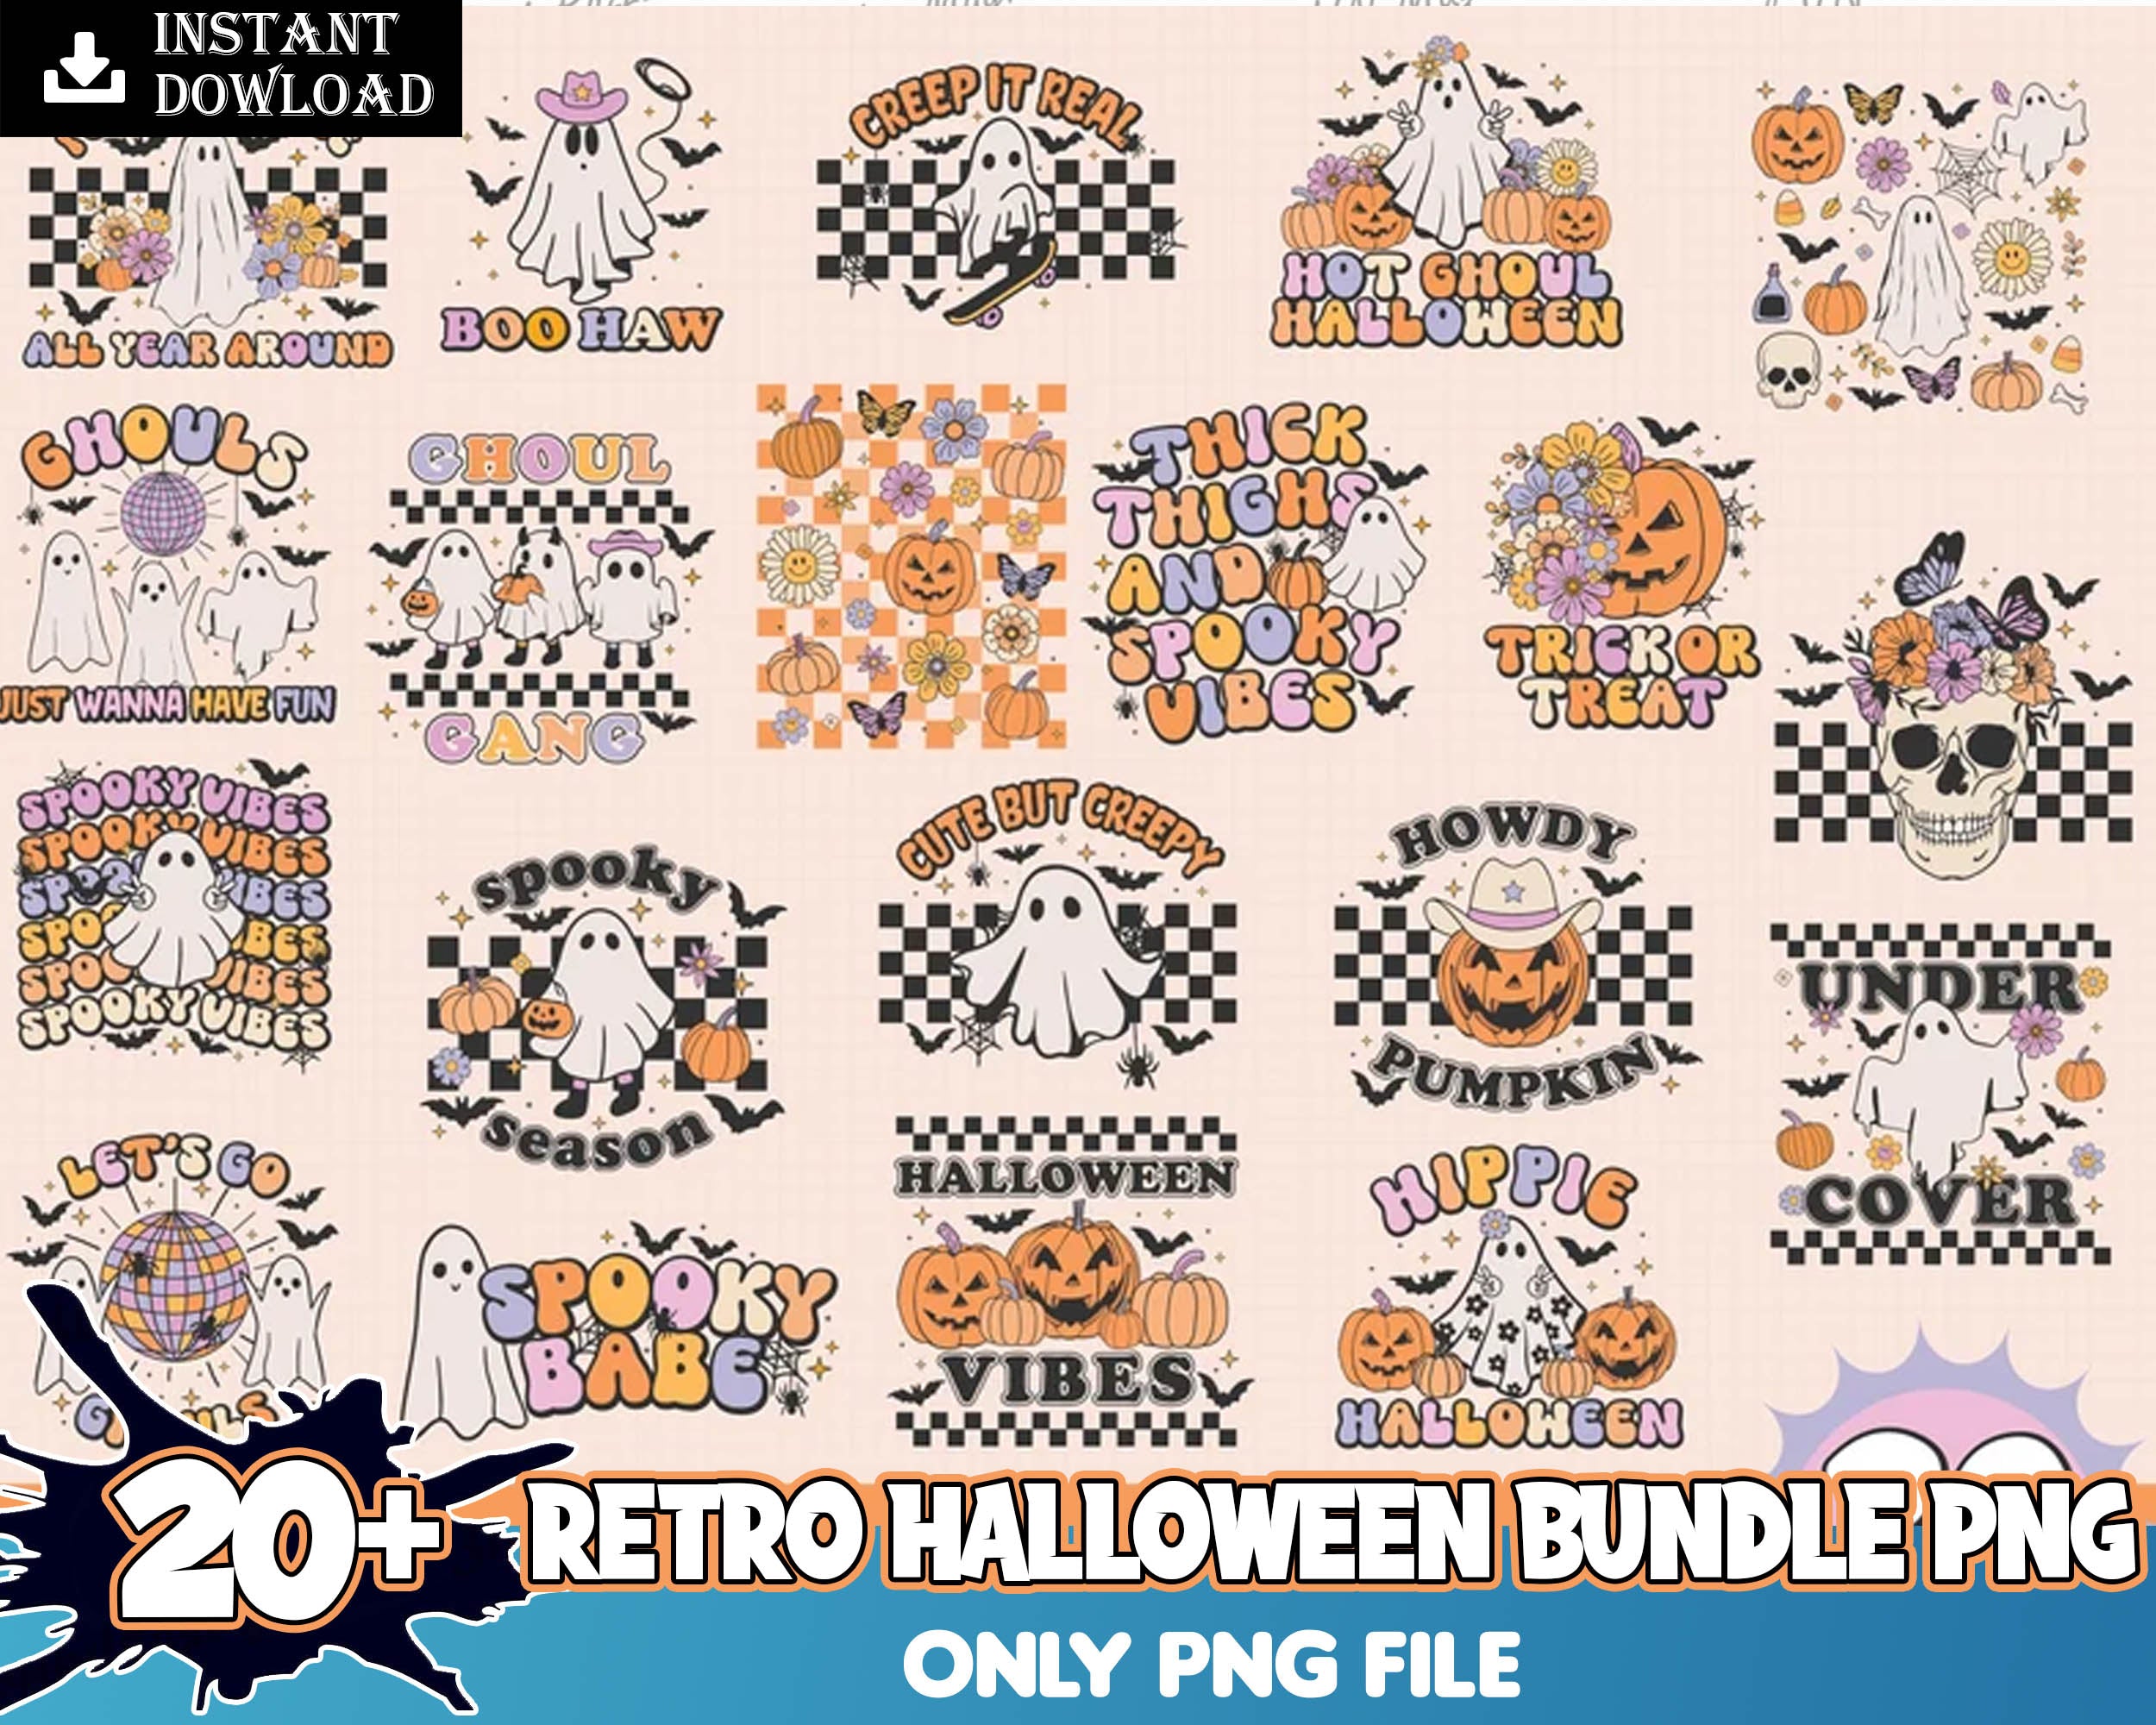 20+ Retro Halloween PNG bundle, Spooky Season Vibes, Ghost Fall Autumn, Png designs for cricut, Digital download.